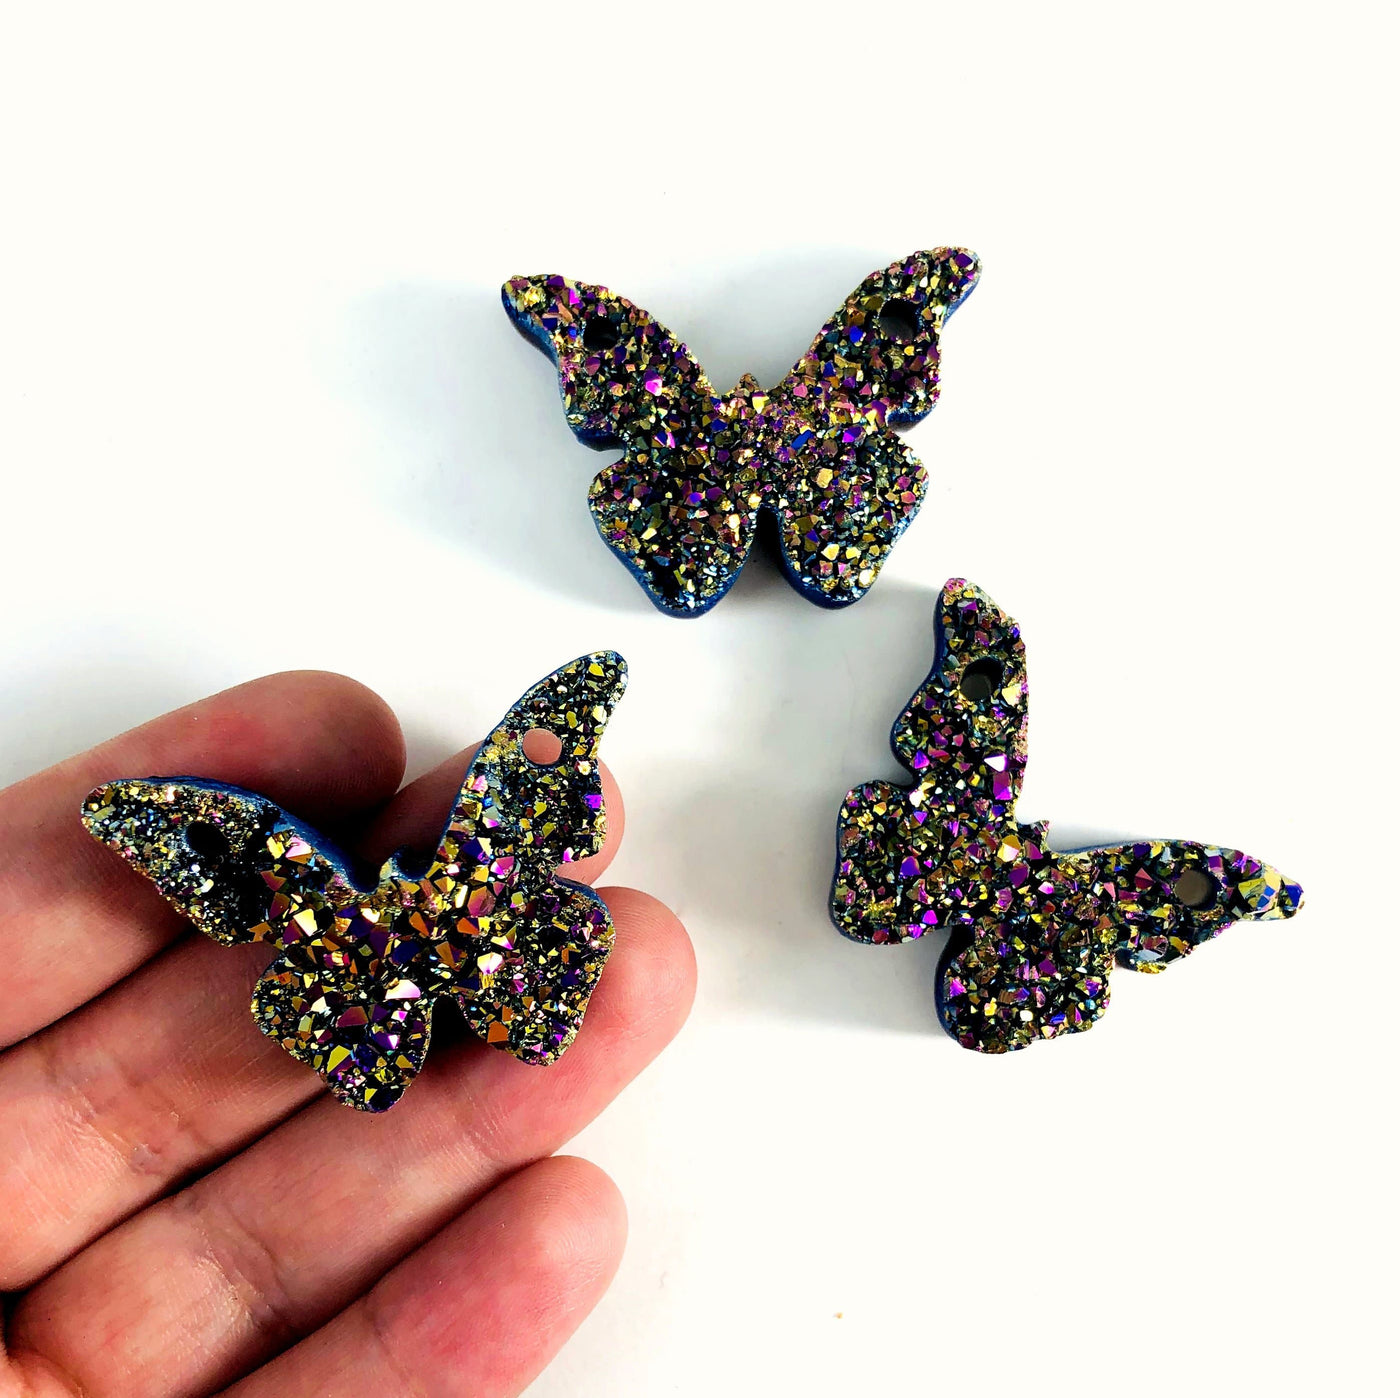 hand holding up butterfly druzy pendant with others in the background